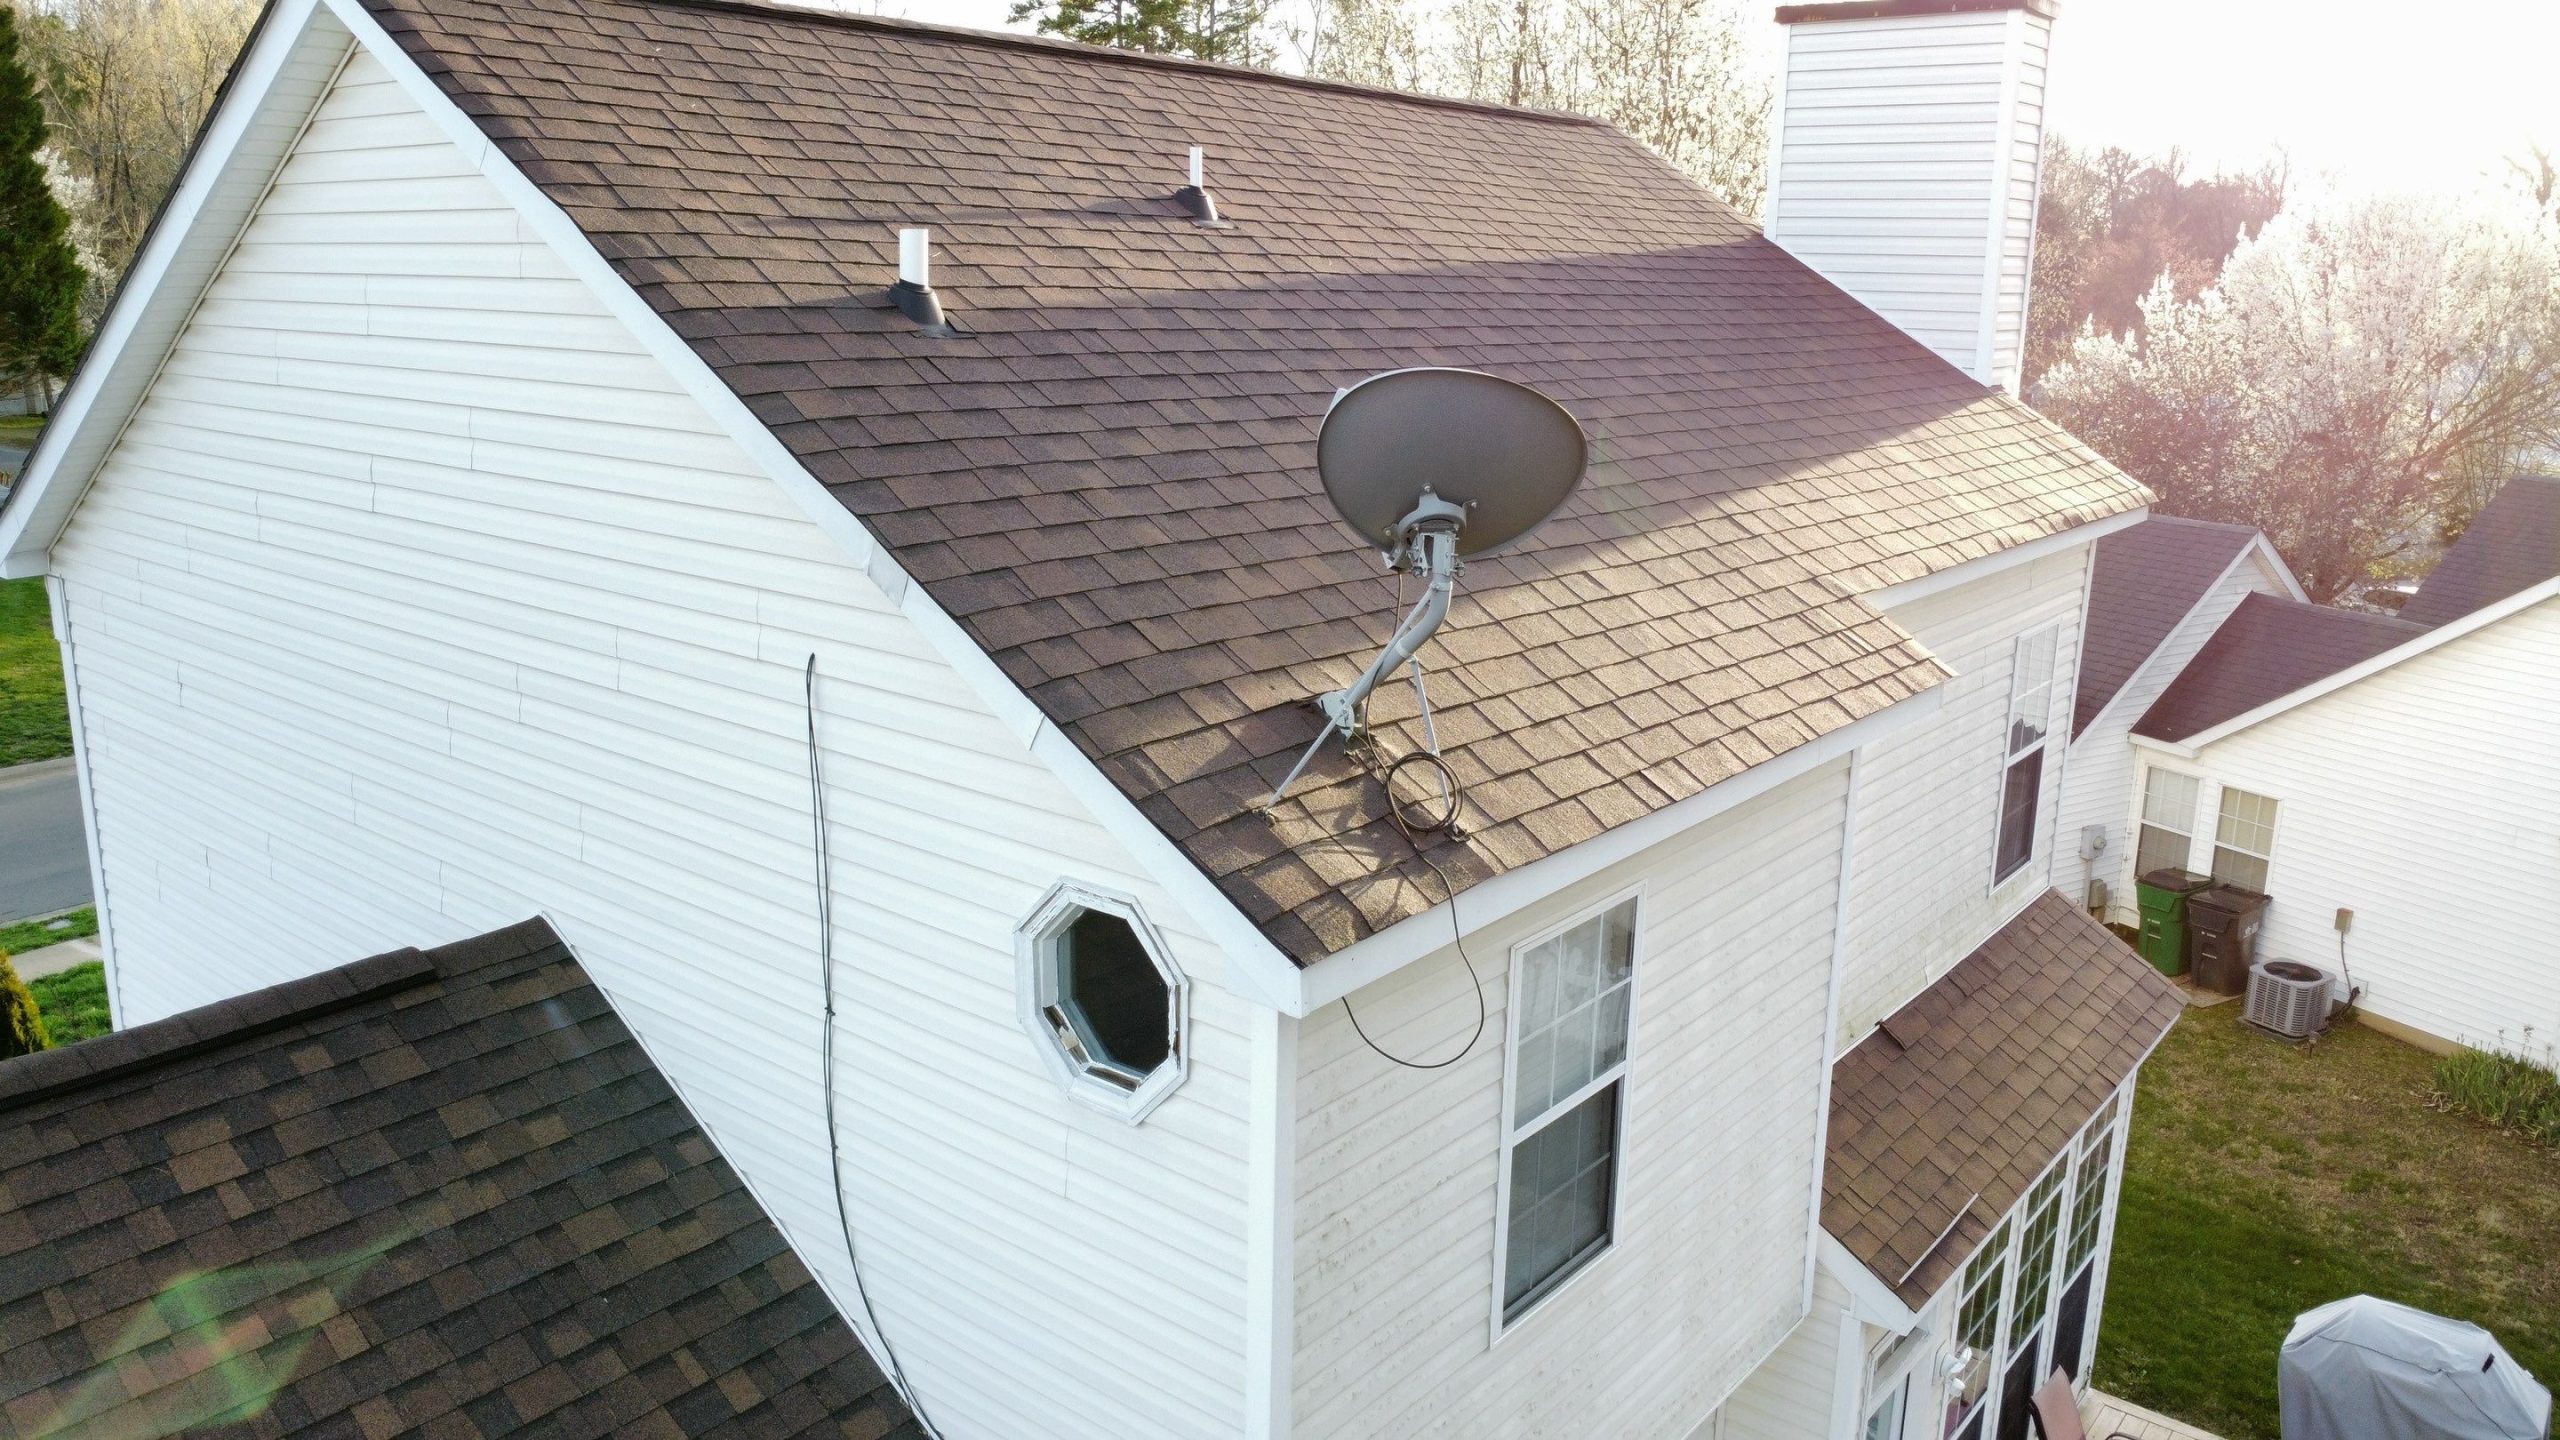 Featured image for “Complete Guide to Satellite Dish Roof Removal”